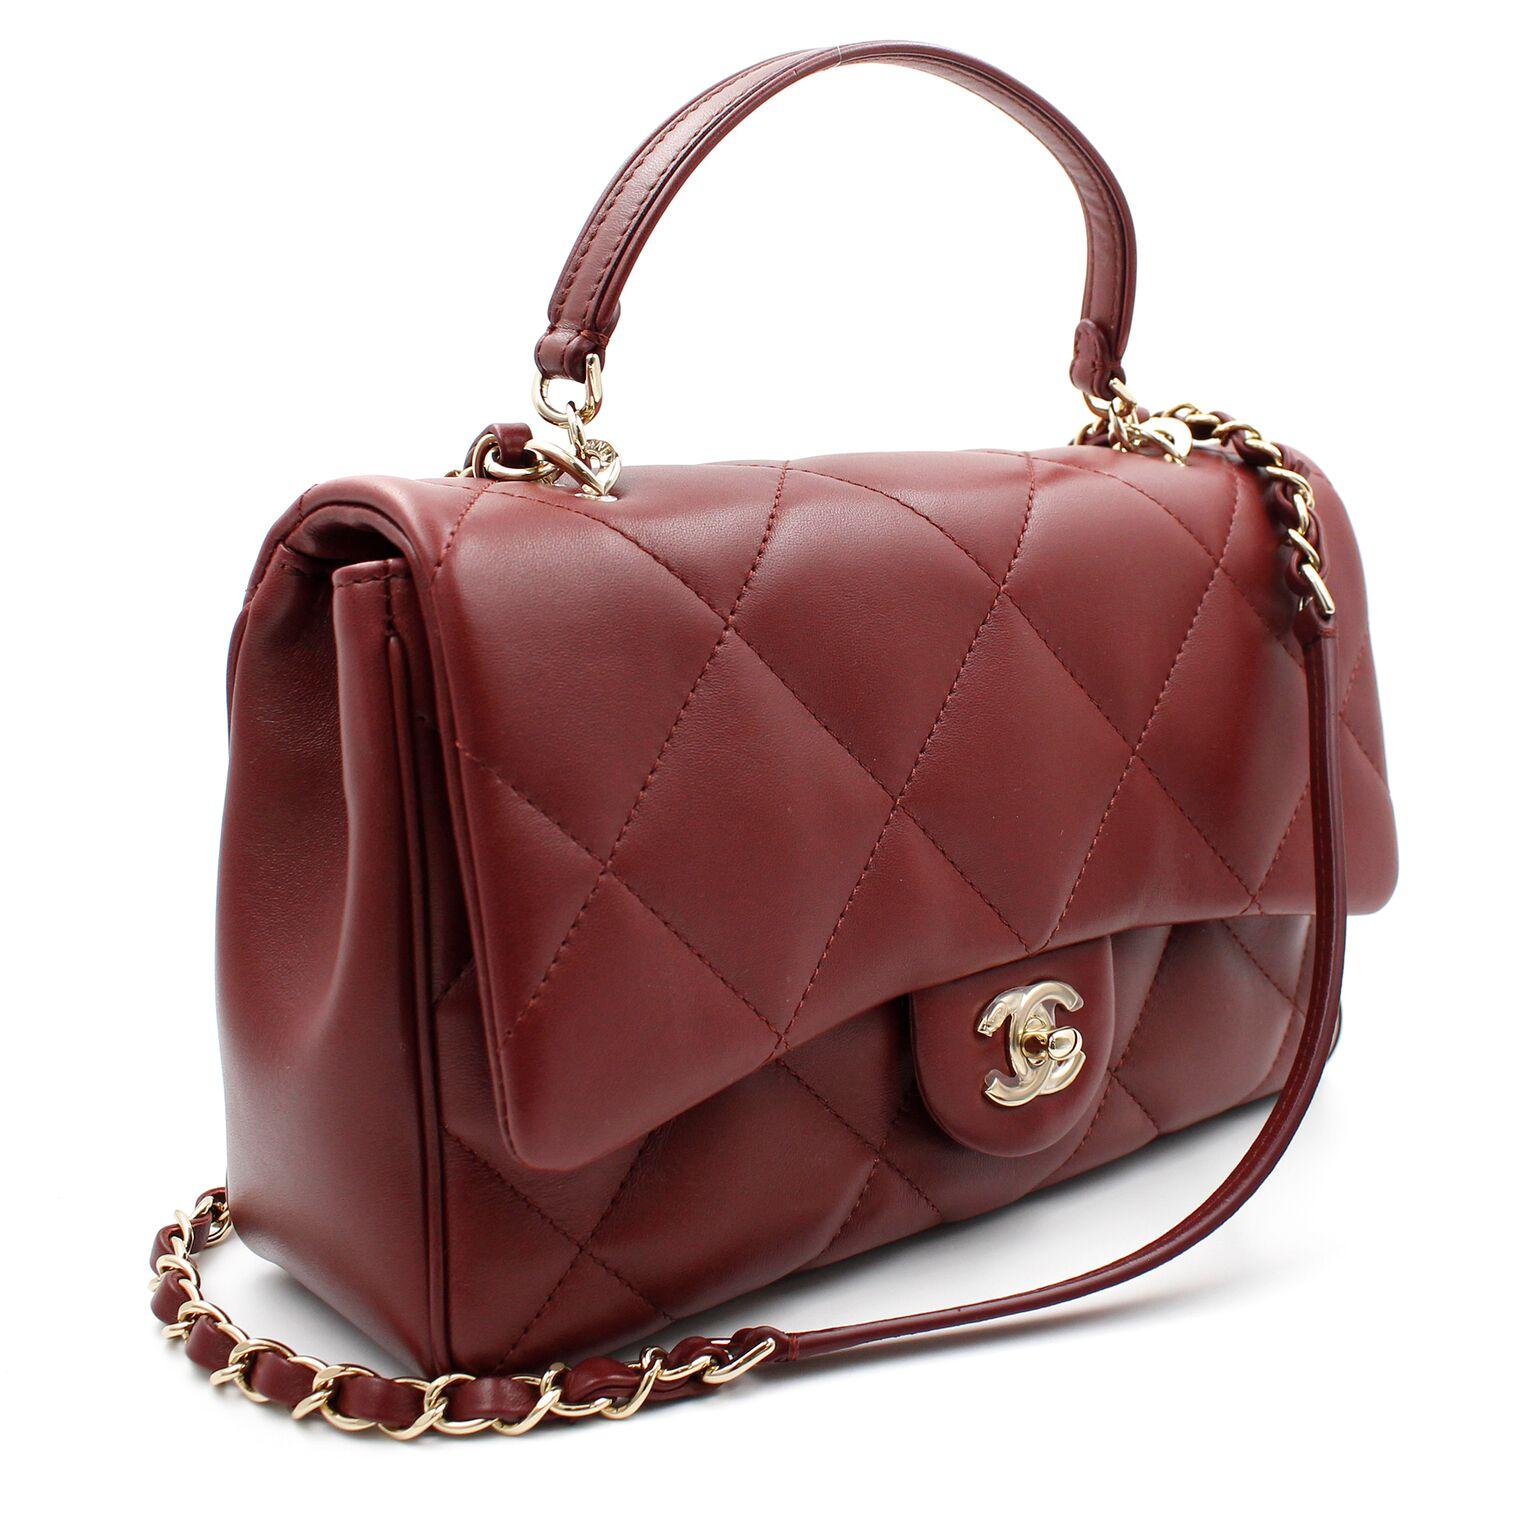 New Chanel Medium Classic Flap Bag in burgundy lambskin leather with gold tone hardware. This bag features a front flap with signature CC turn-lock closure with an interwoven gold tone chain link with burgundy leather shoulder/cross-body strap.The